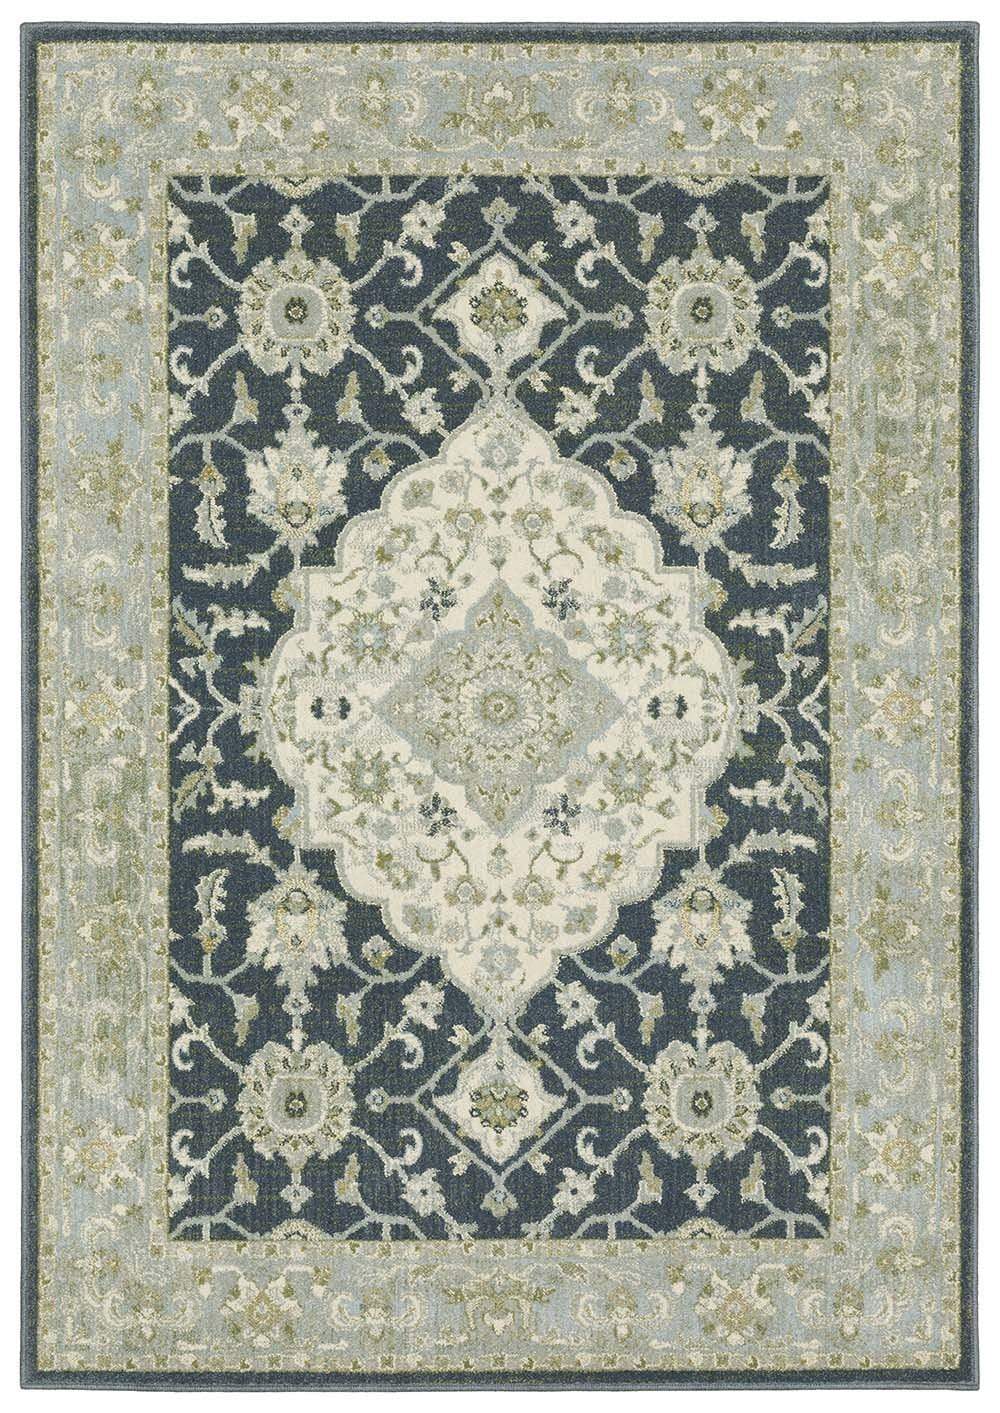 Branson Rug Collection